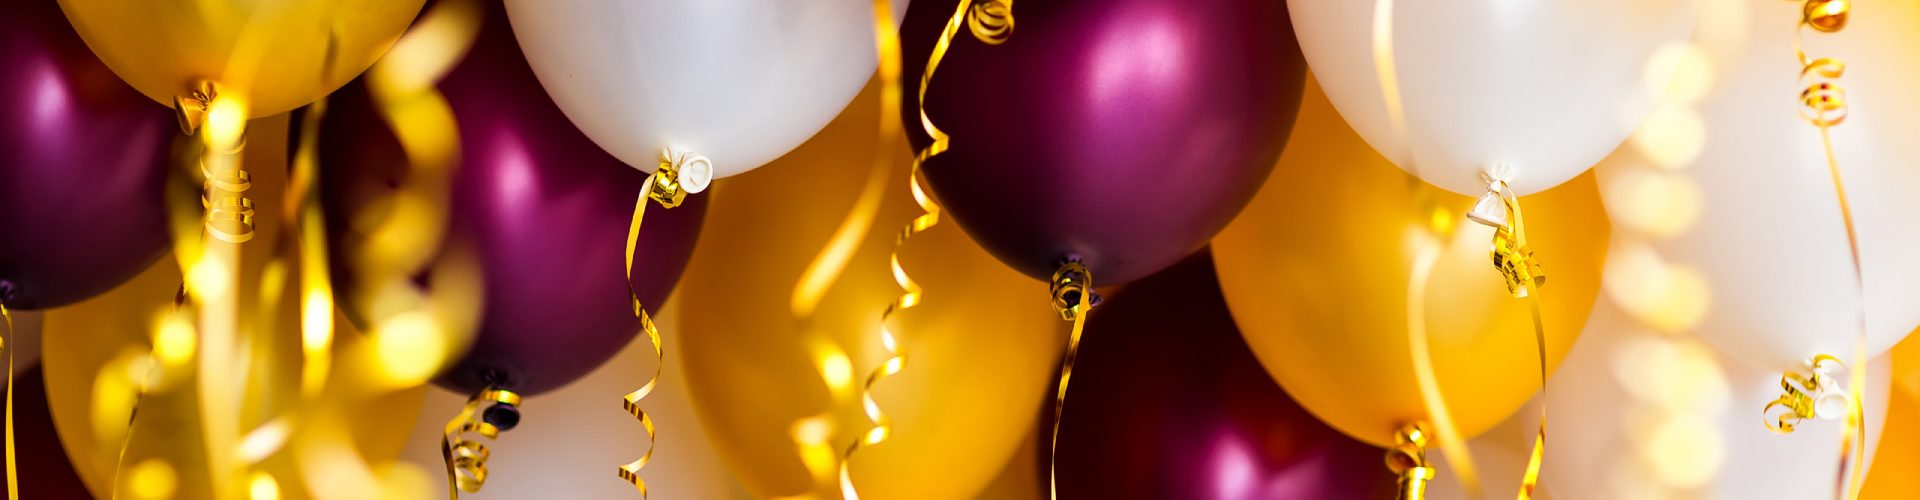 Purple, white and gold balloons at a party venue